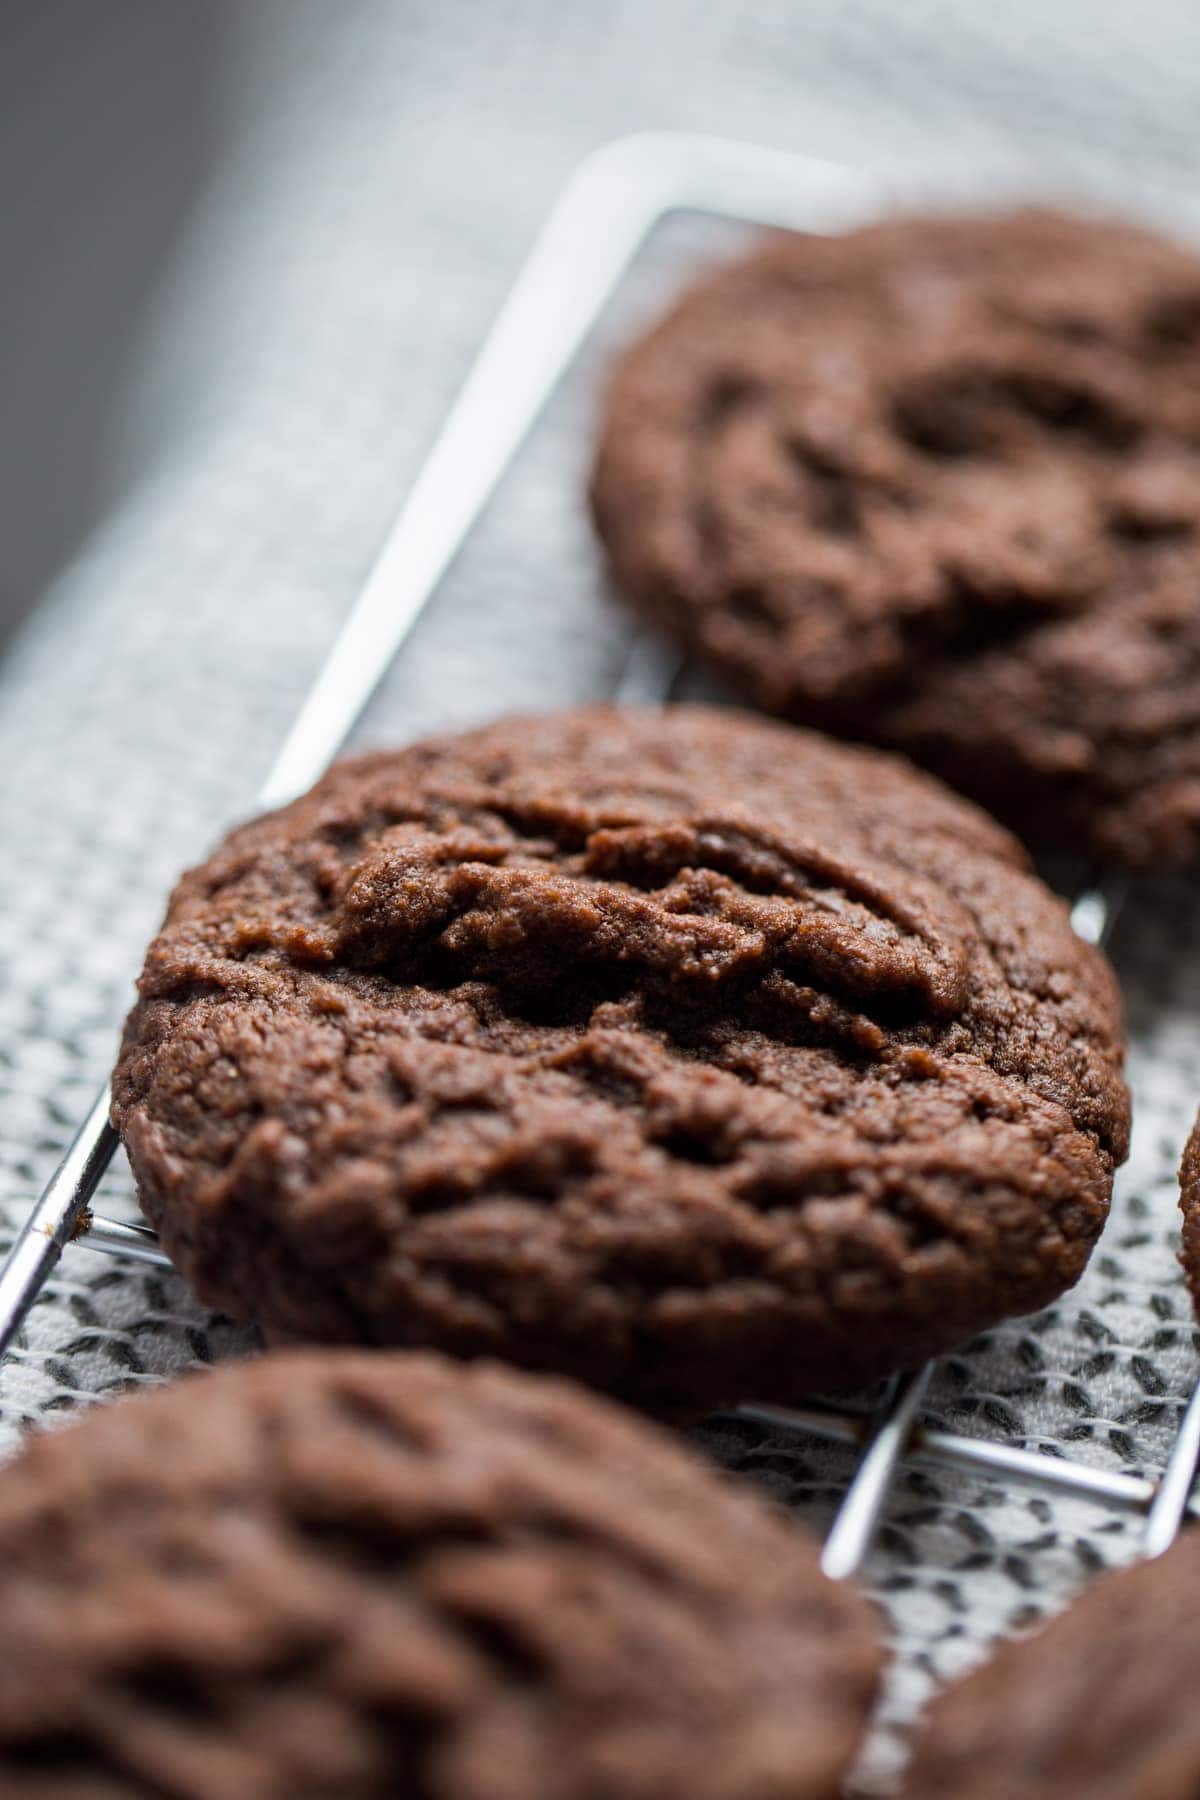 Chocolate Cookies on a cooling wrack